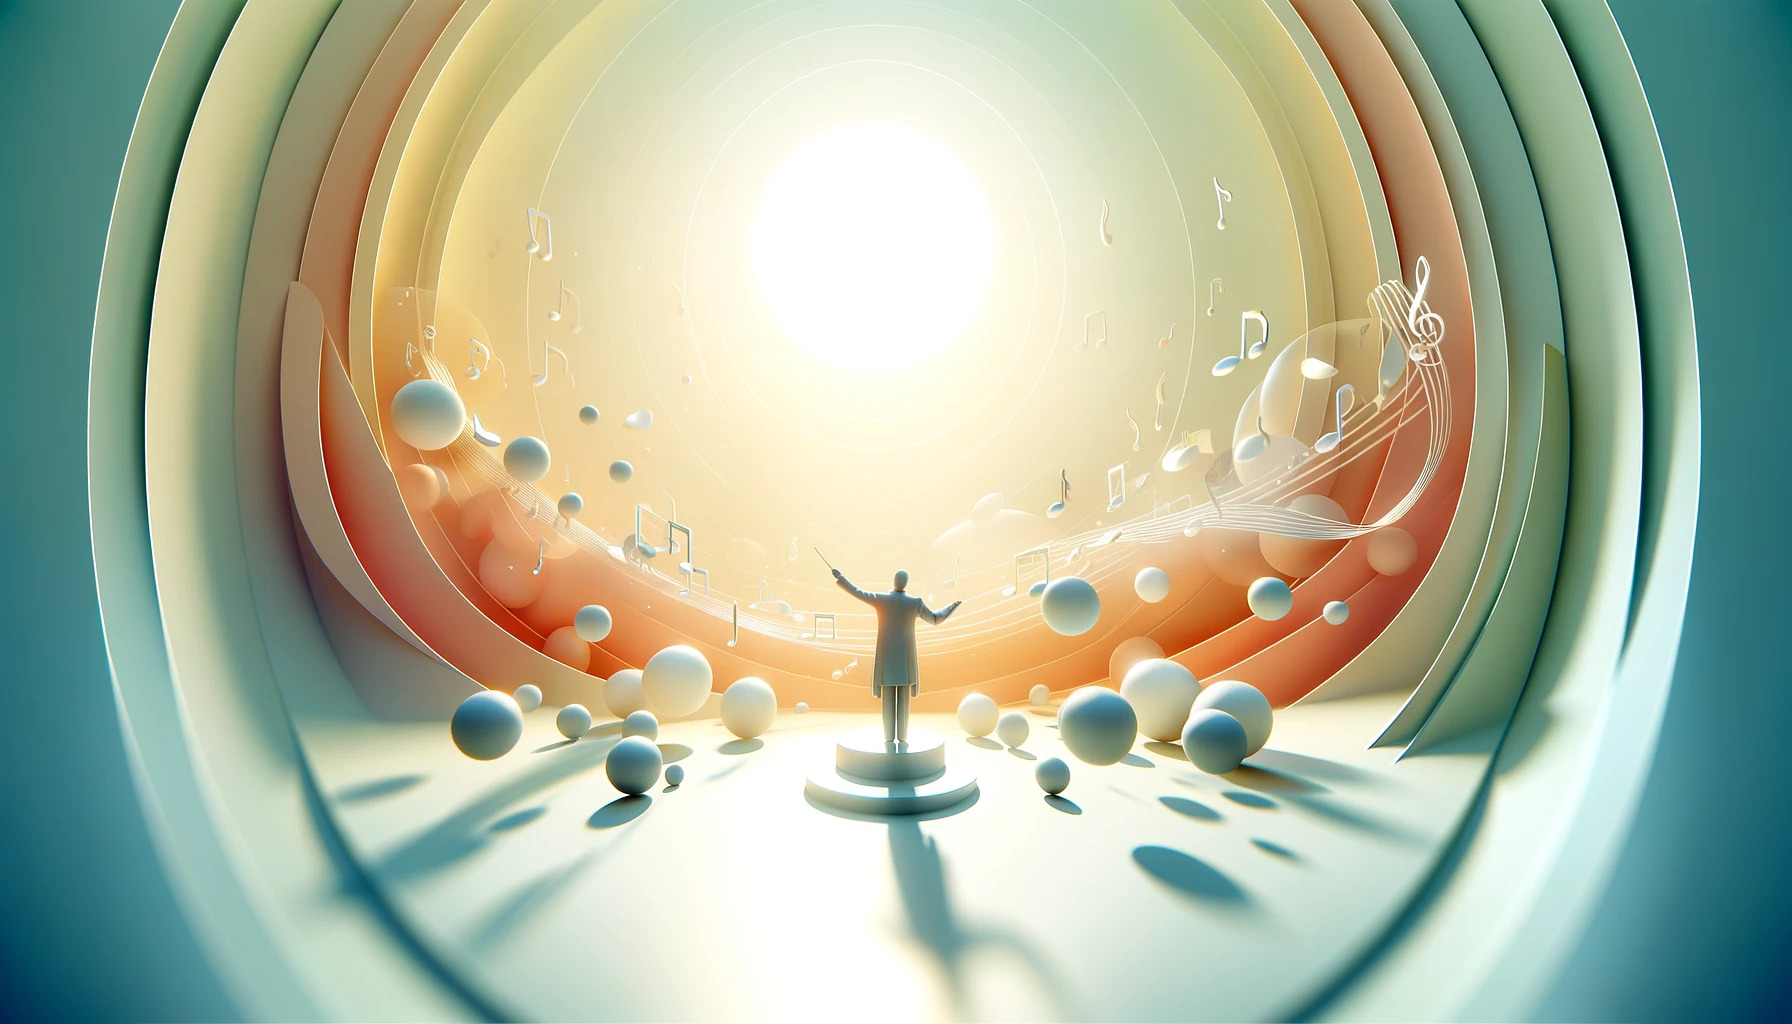 Abstract image of a conductor in a minimalist, 3D-like style, surrounded by summer colors and bathed in the serene light of an afternoon sun, conveying a sense of tranquility and lightness.